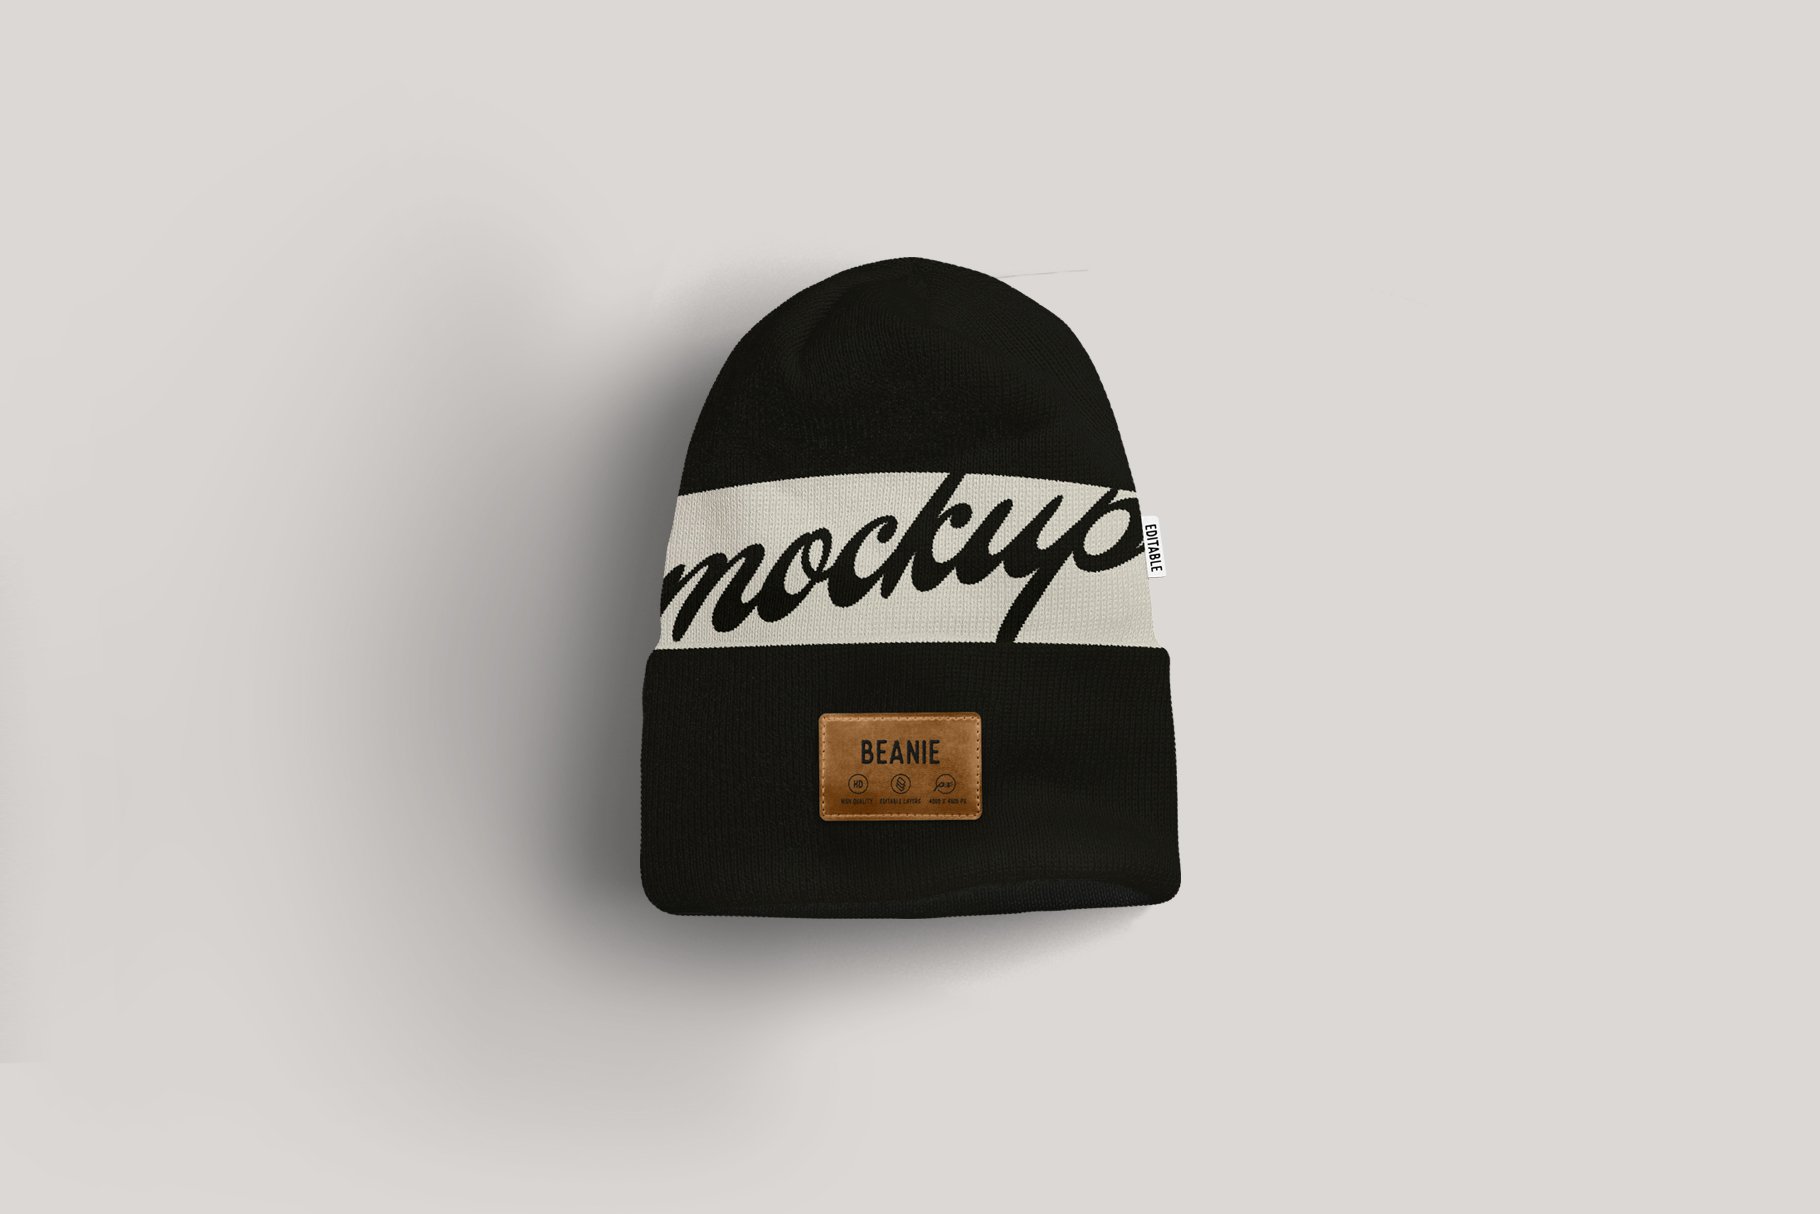 Beanie Hat Mockup cover image.